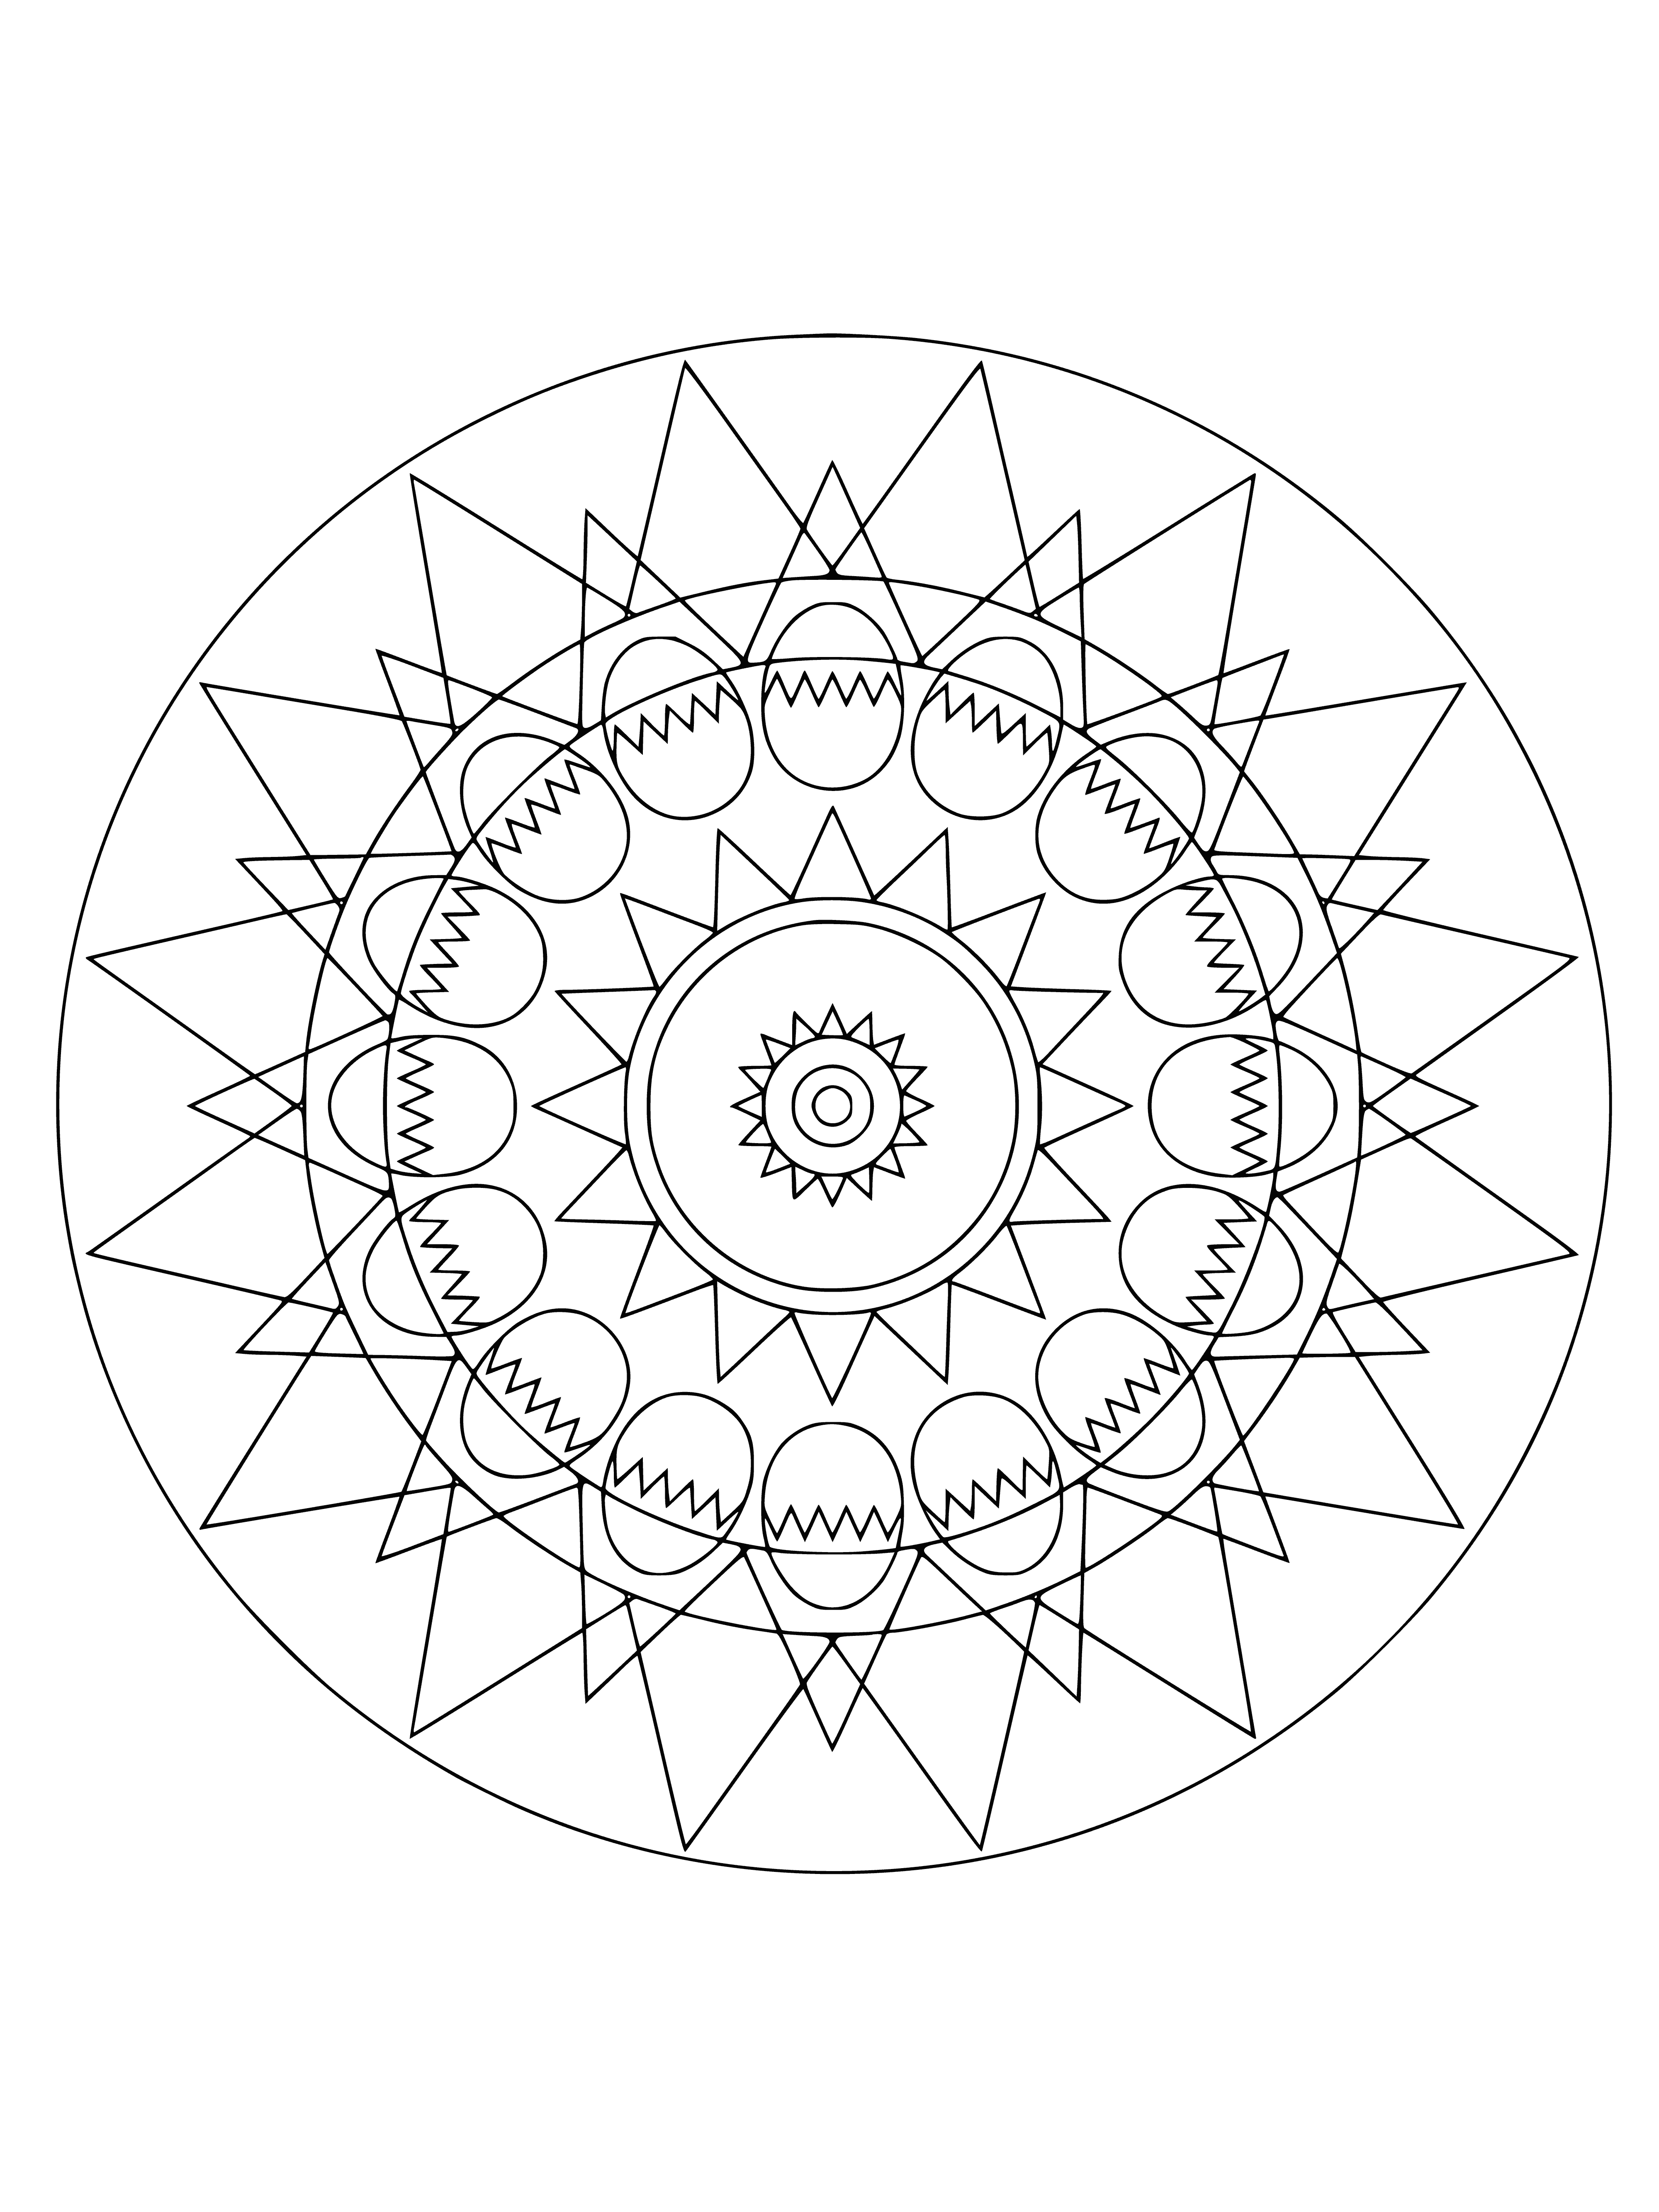 coloring page: An Easter mandala coloring page featuring eggs, bunnies and more for meditation & artistic expression.